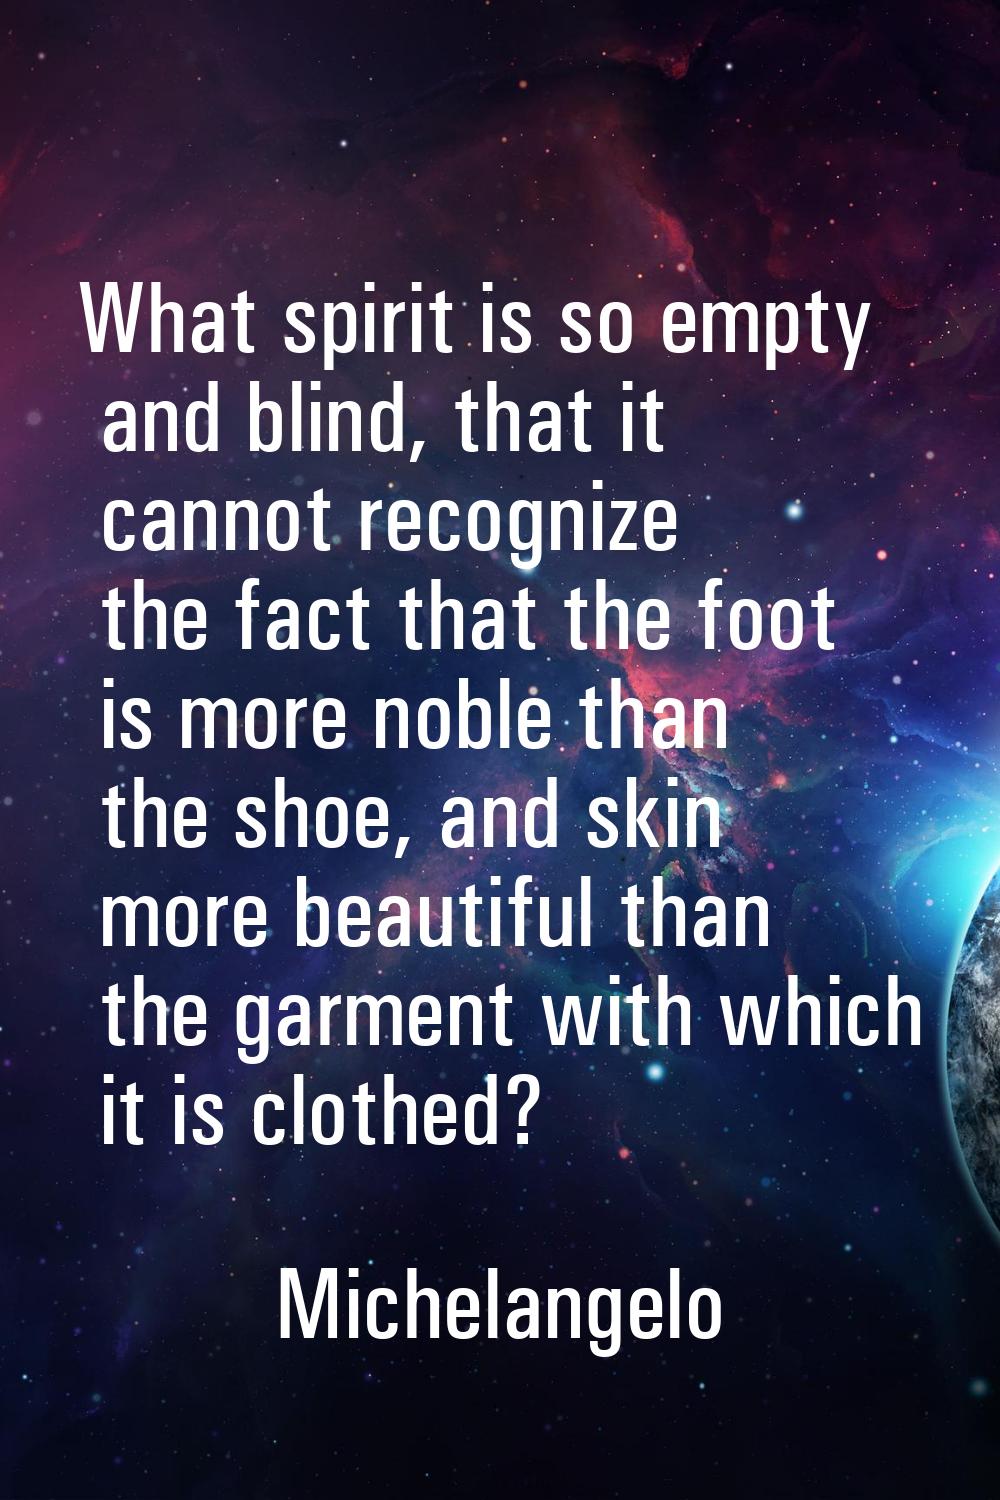 What spirit is so empty and blind, that it cannot recognize the fact that the foot is more noble th